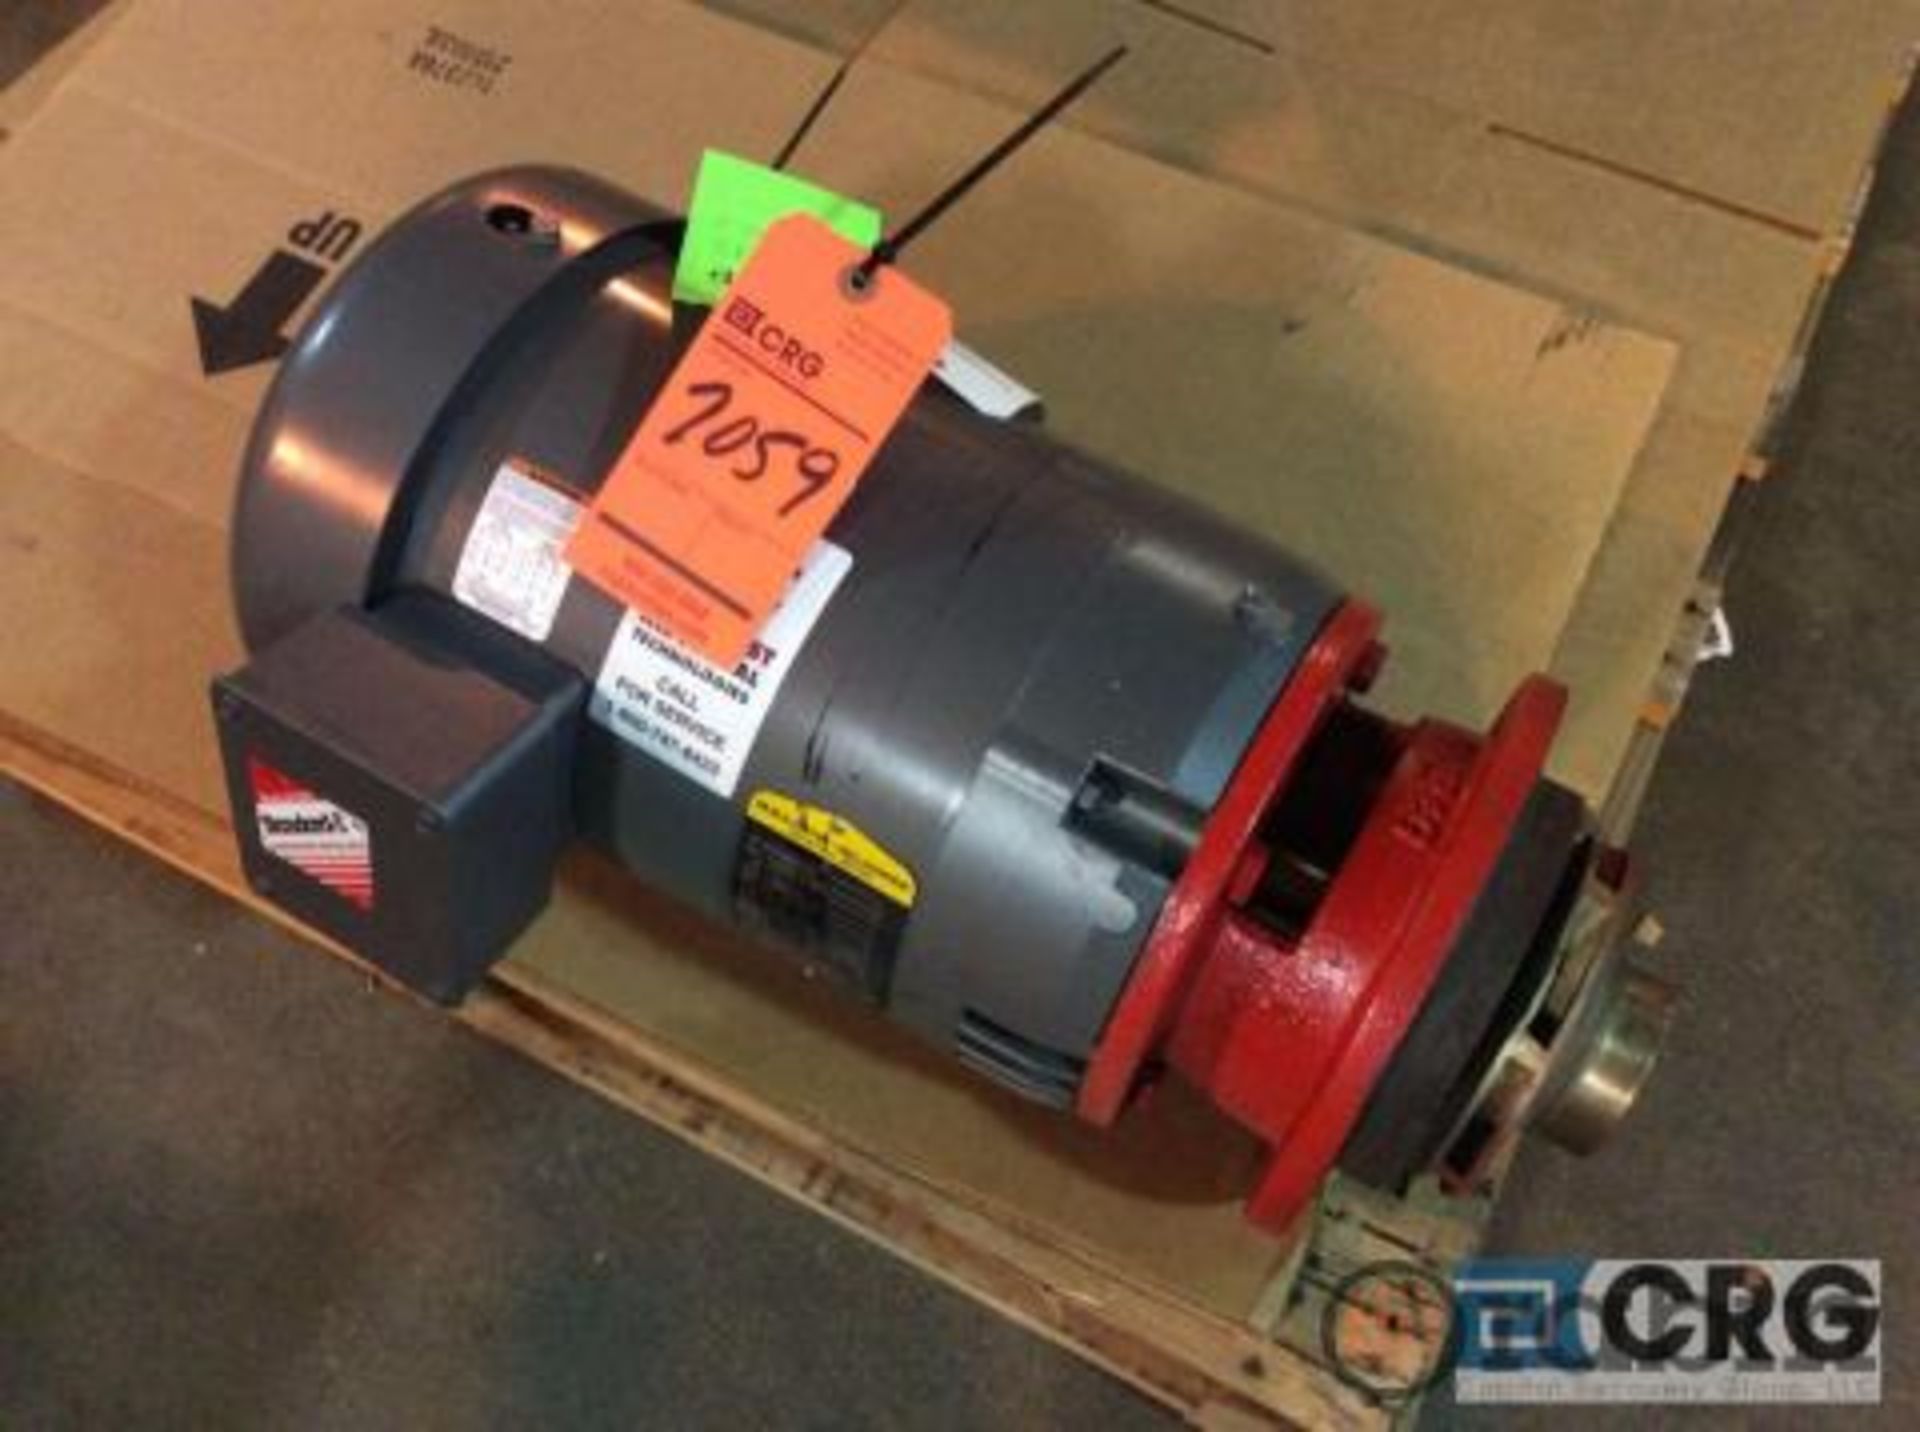 Hot water pump, 15 hp. motor, 3 phase, 3450 rpm, model VJMM3314T [Peoria]